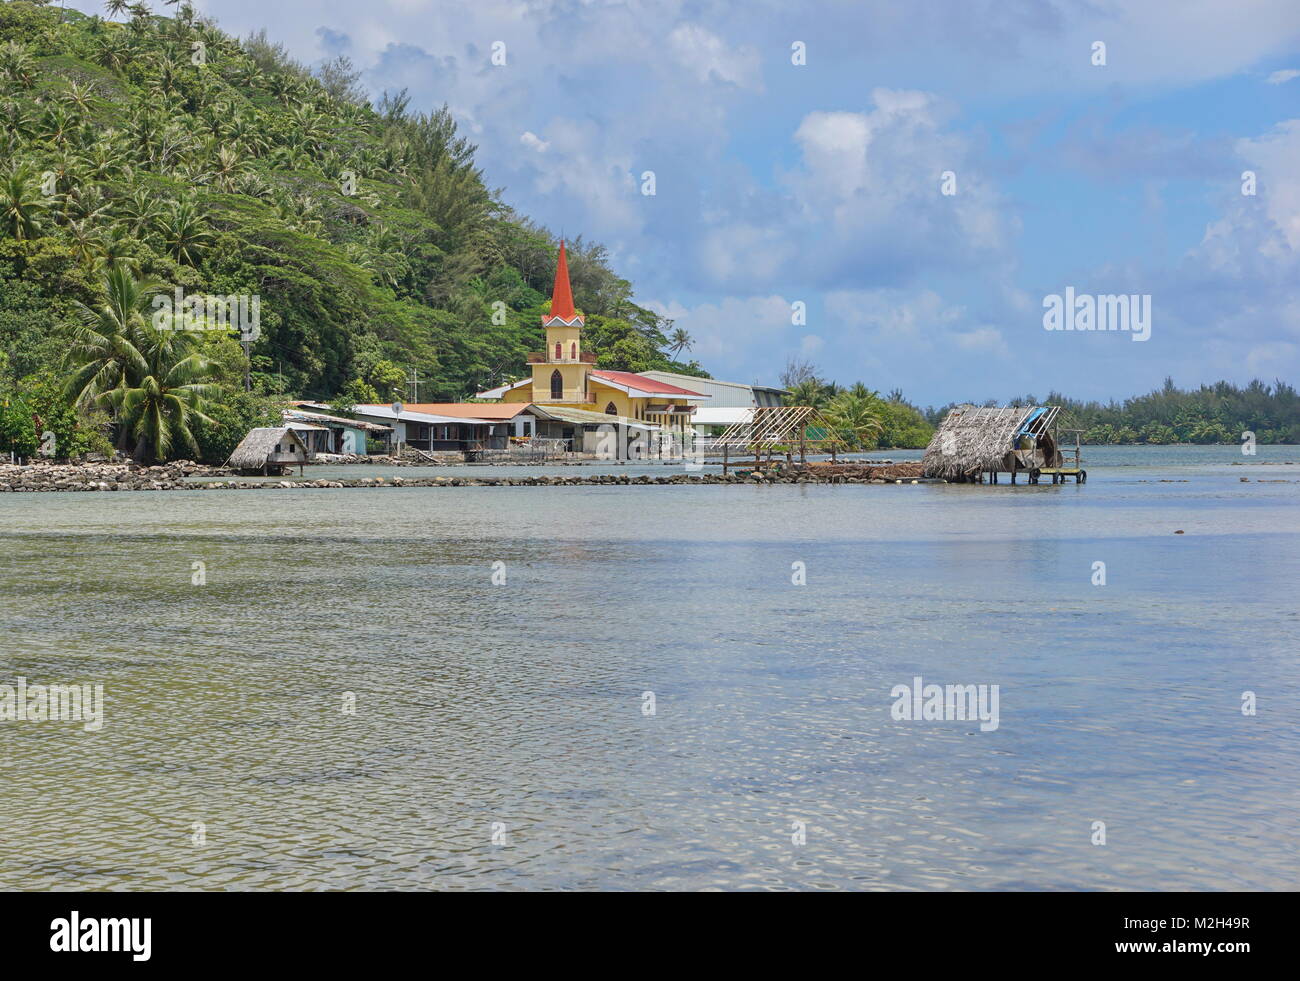 Huahine island church and fishing trap of Maeva village on the shore of the saltwater lake Fauna Nui, French Polynesia, south Pacific Stock Photo